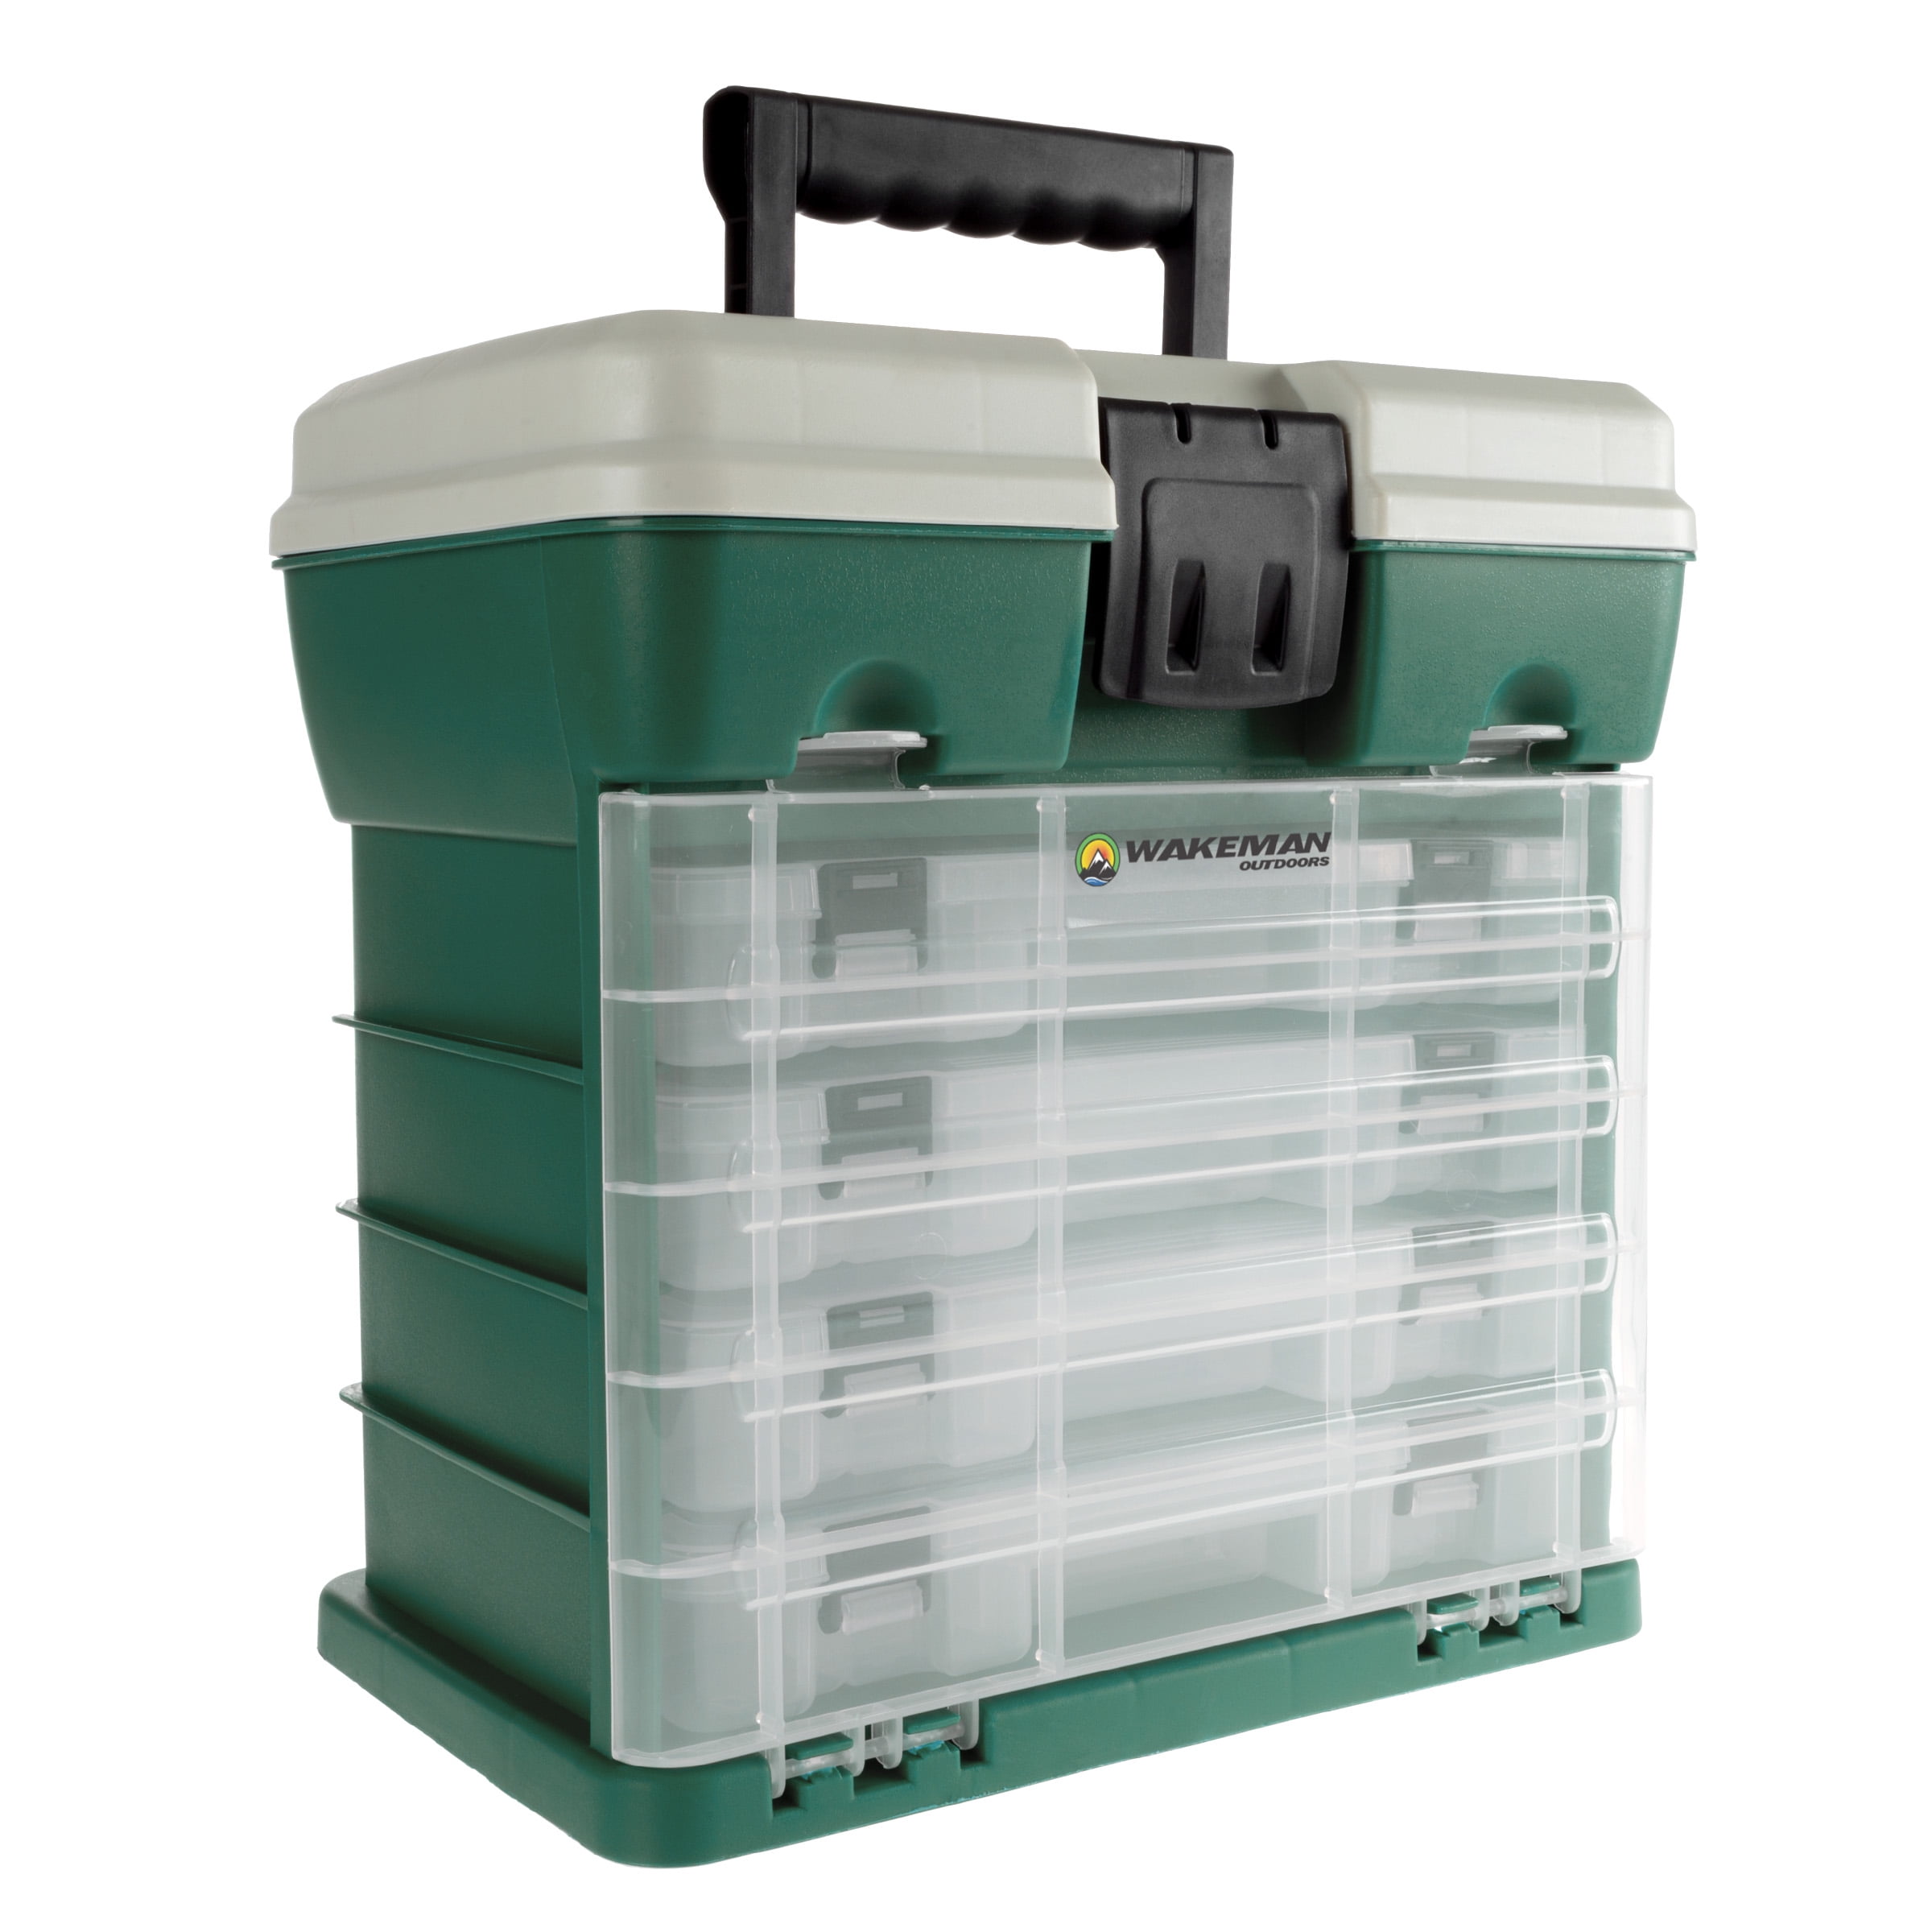 Wakeman Plastic 4-Drawer Tackle Box Organizer for Fishing and Crafts, Green  